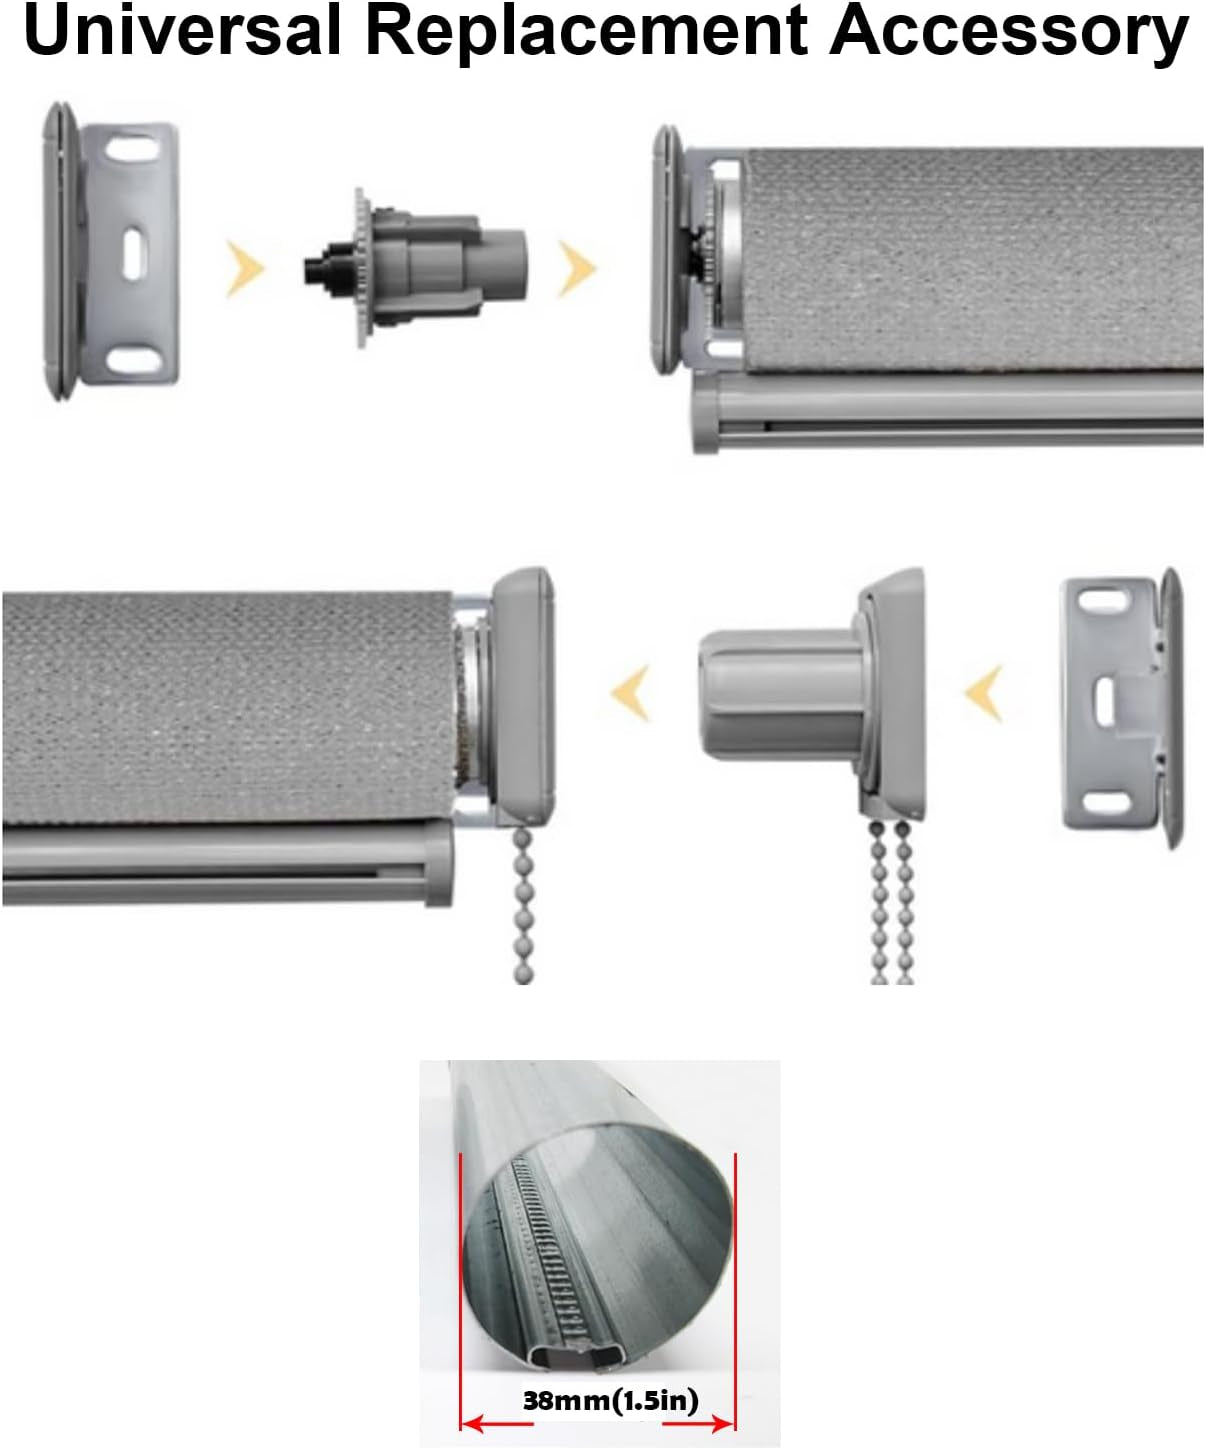 38Mm Roller Blind Repair Kit, Universal Replacement Clutch Installation Accessories Parts for Roller Shade Crodless Bracket